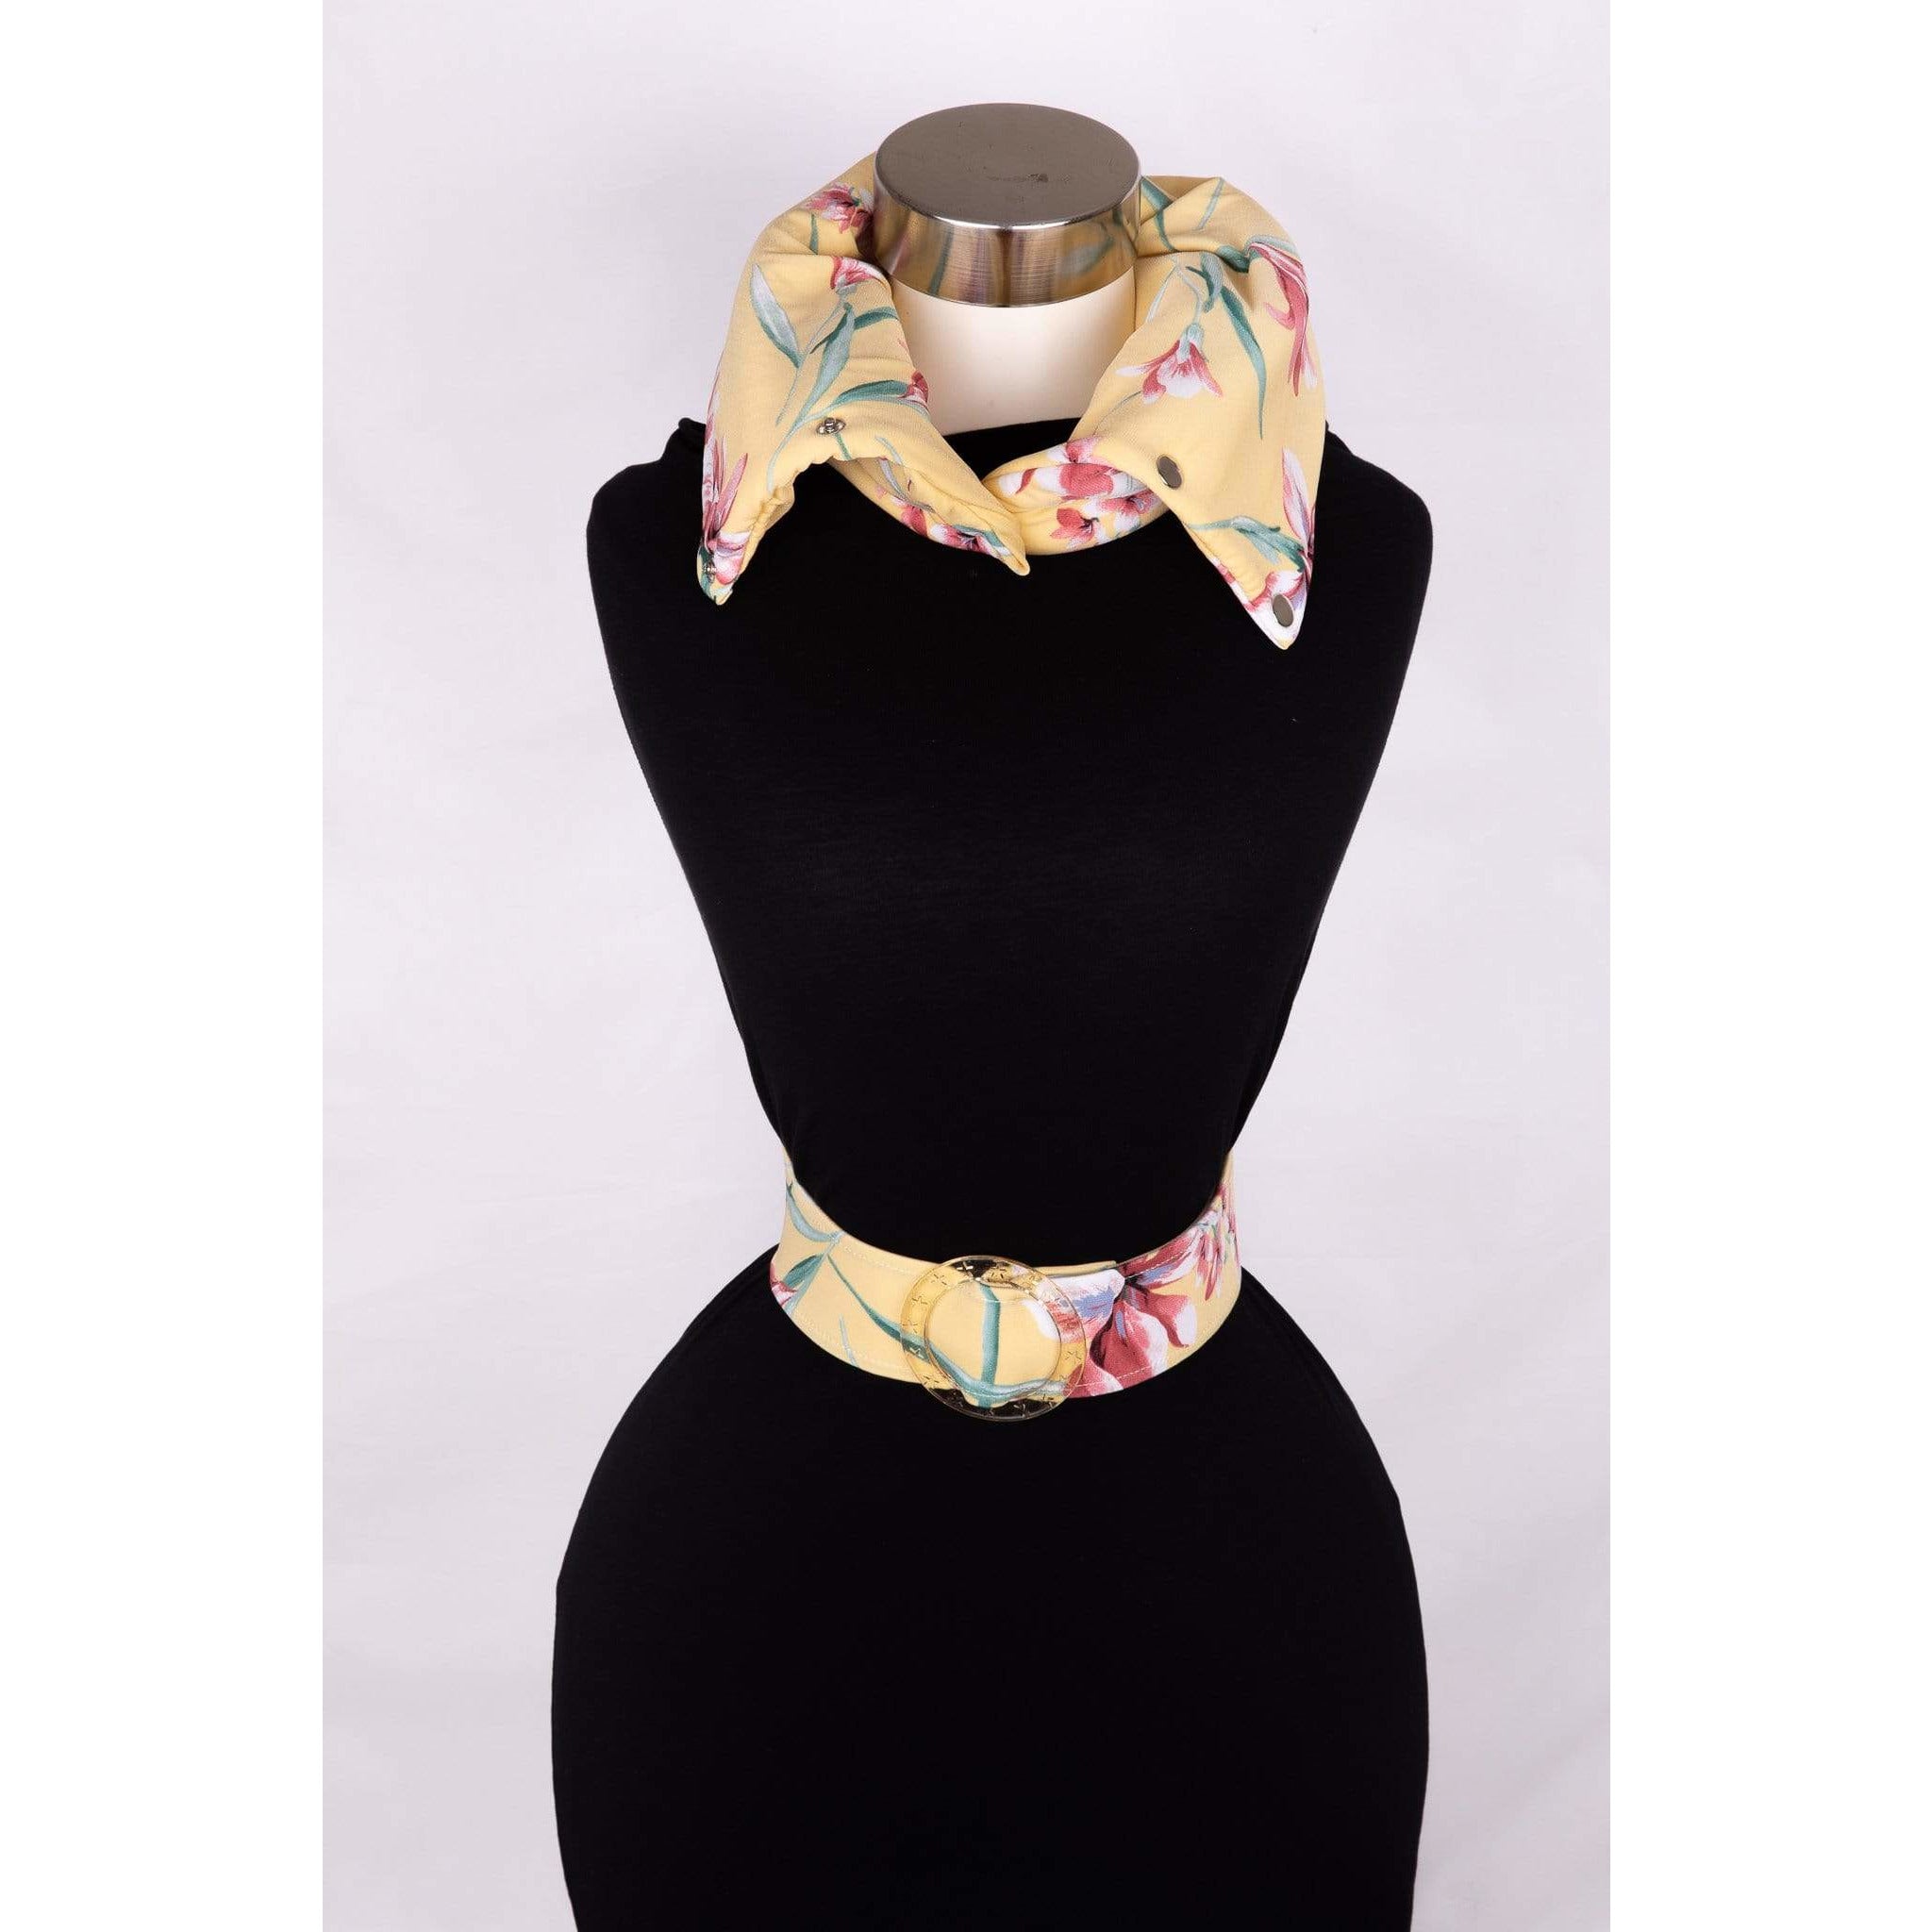 Combination Neck Warmer and Belt with free matching pouch (that attaches to belt)- Lemon with floral print.